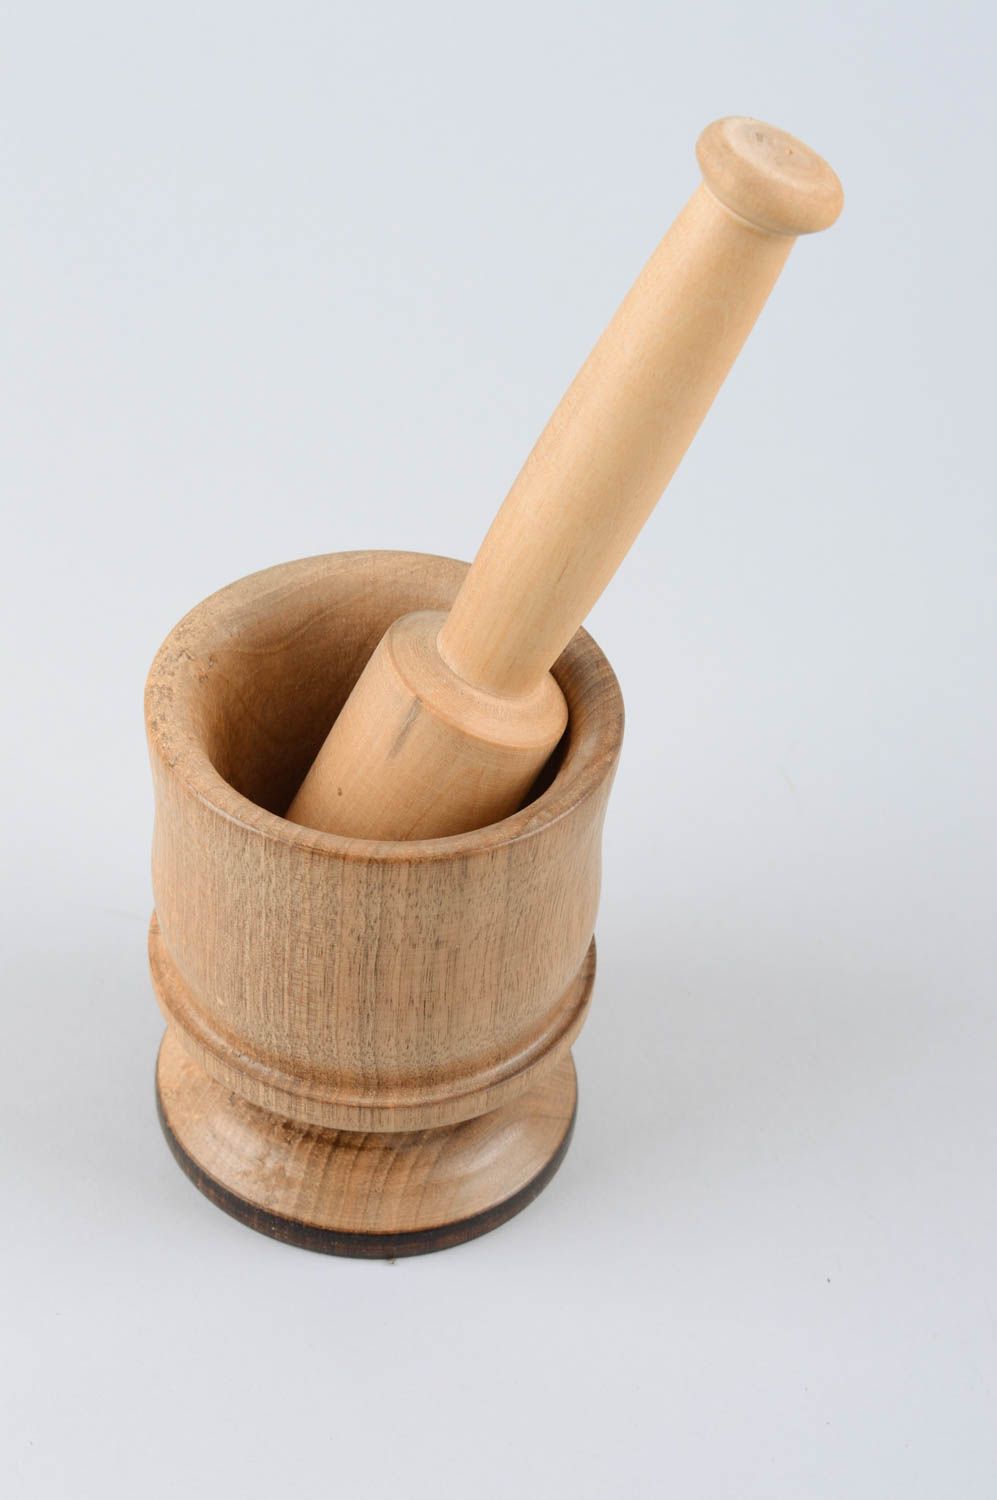 Handmade organic mortar and pestle wooden hand spice grinder wooden mortar photo 2